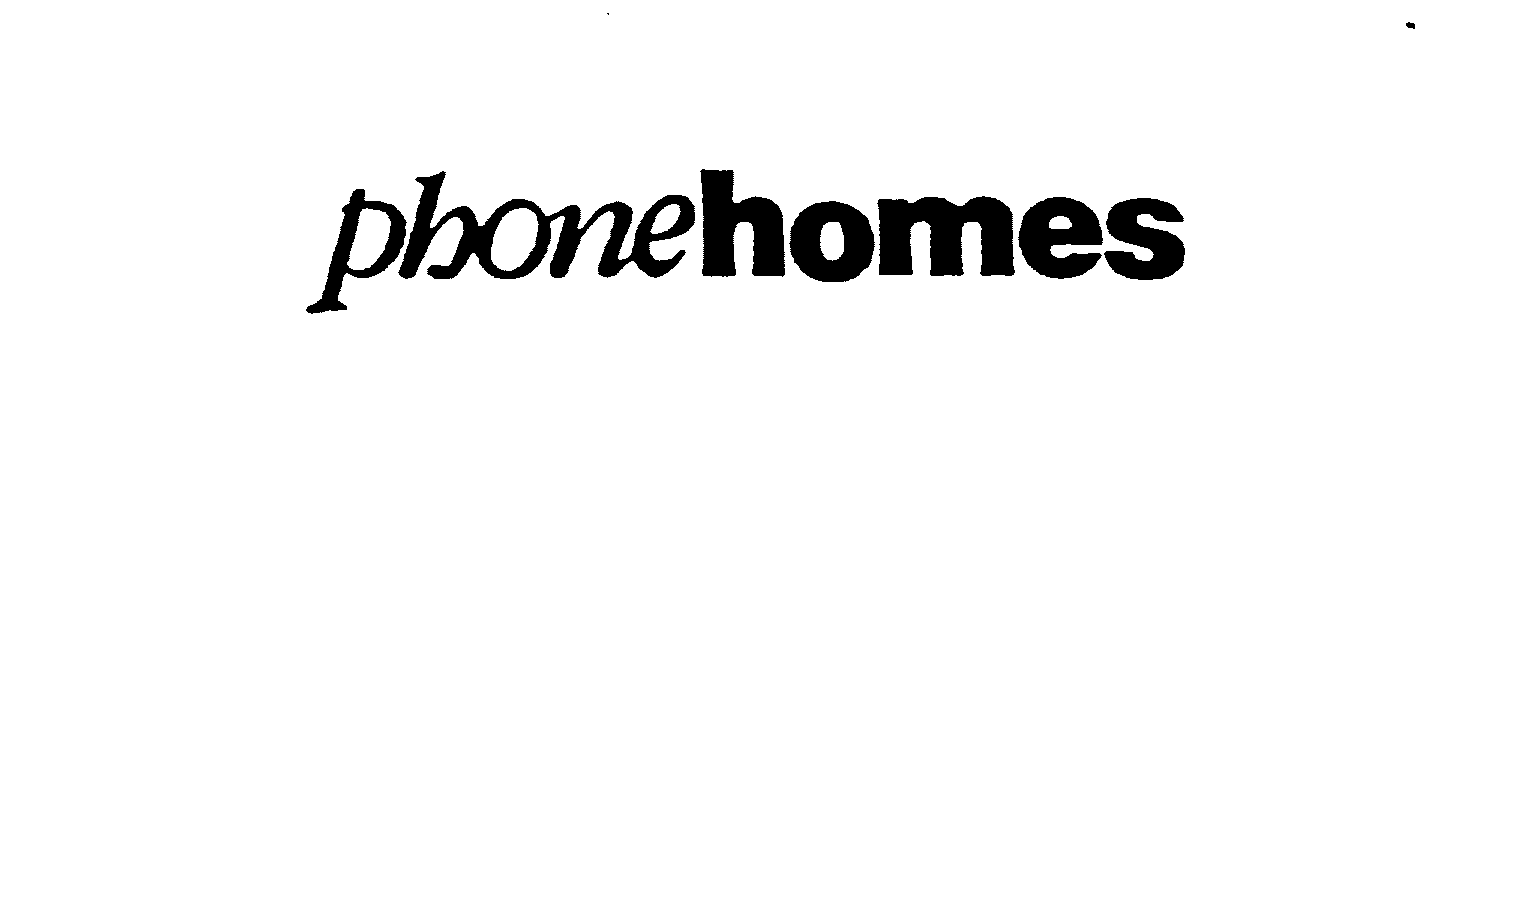  PHONEHOMES